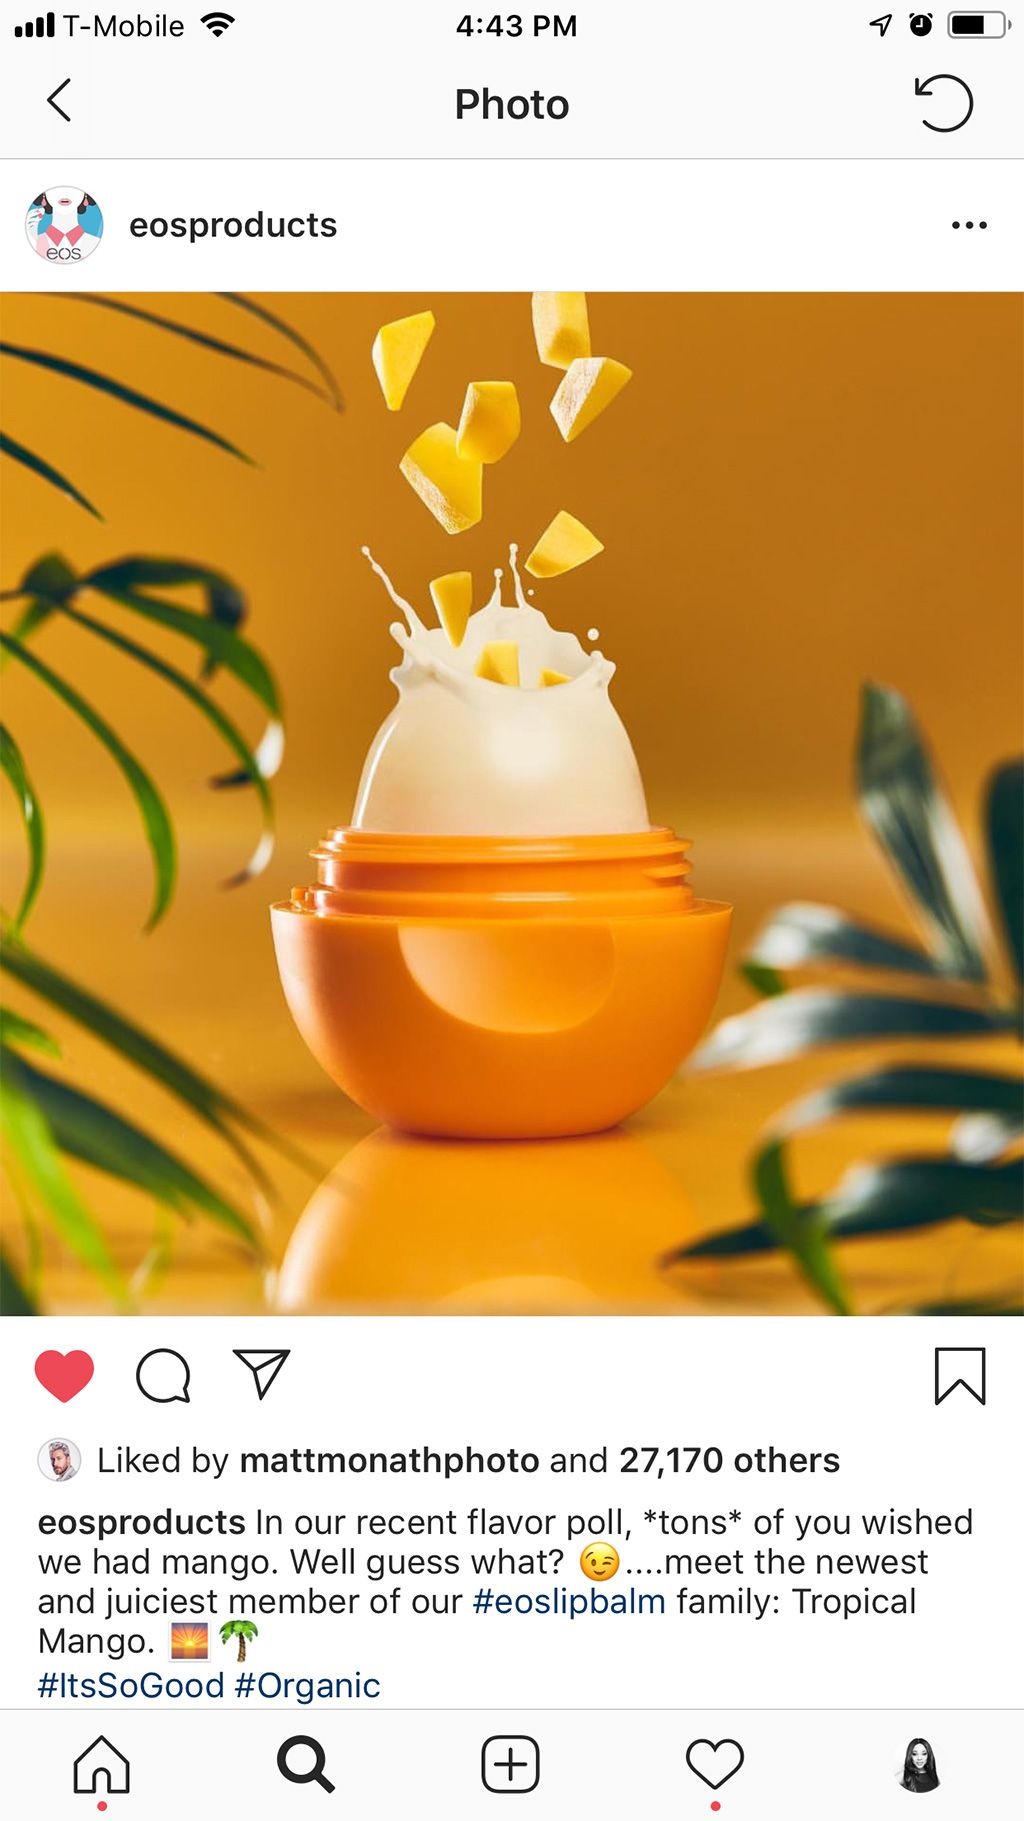 Screenshot of Instagram post for eosproducts showing their flavored lip balm